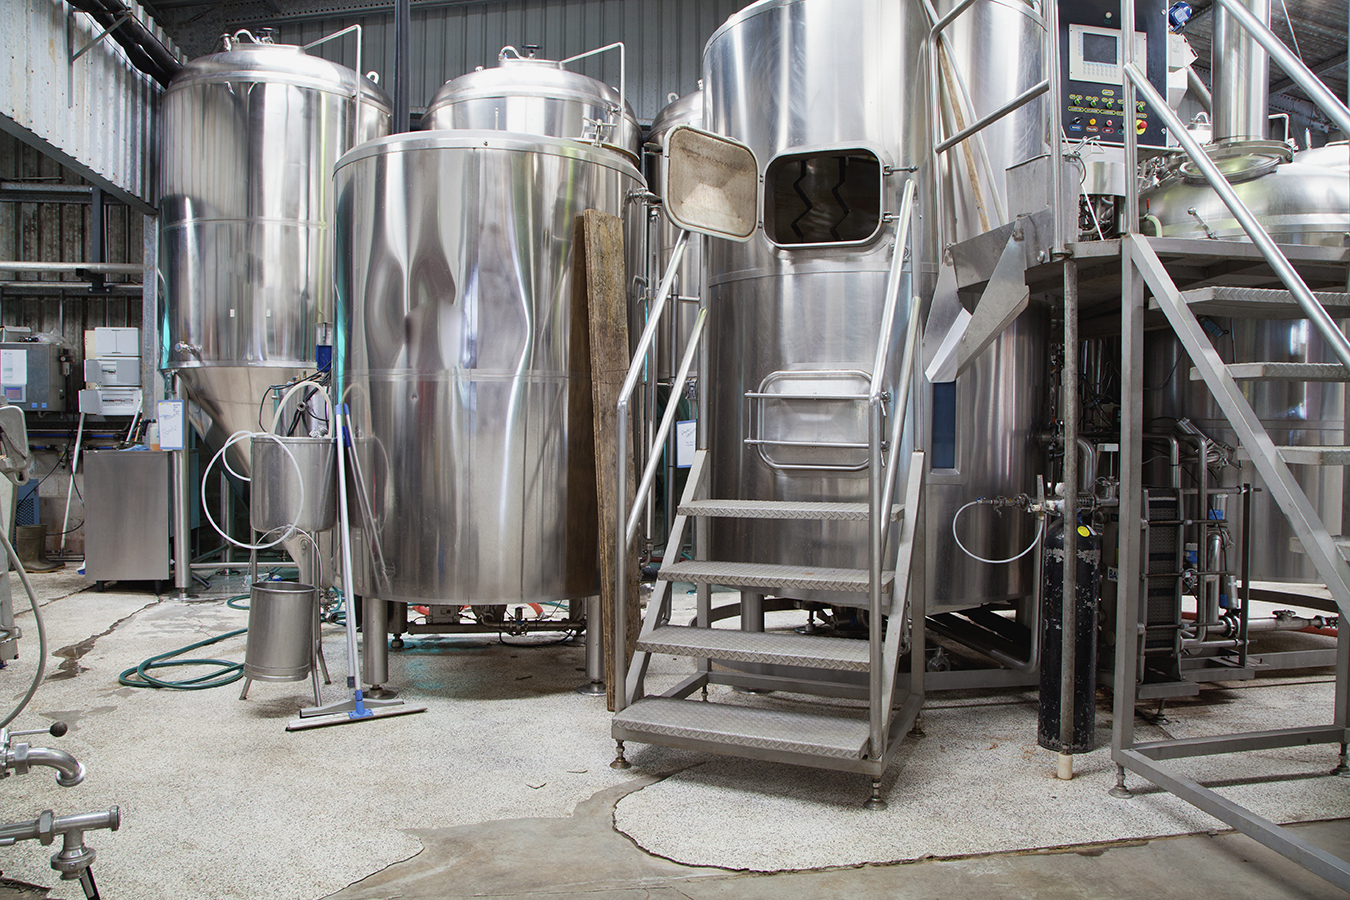 Boutique micro brewery with stainless steel equipment